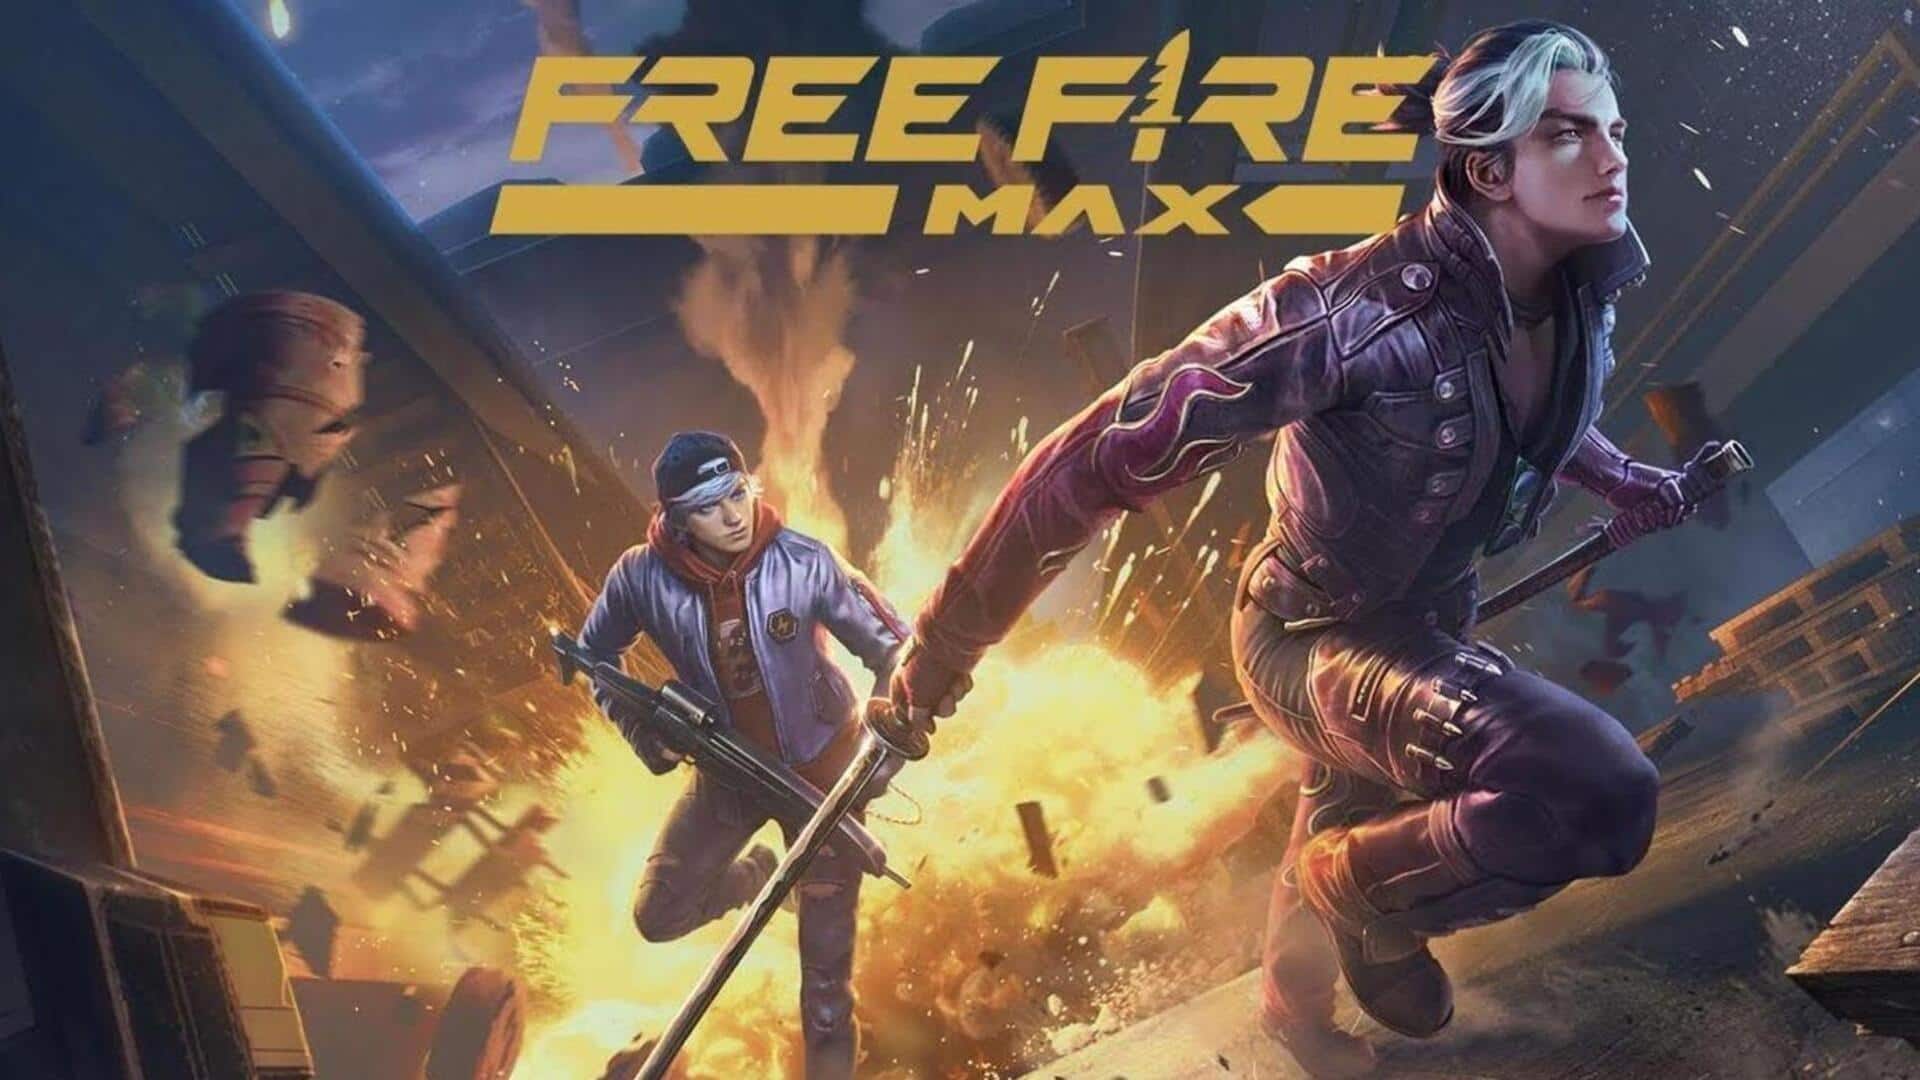 Garena Free Fire MAX codes for January 27: Redeem now